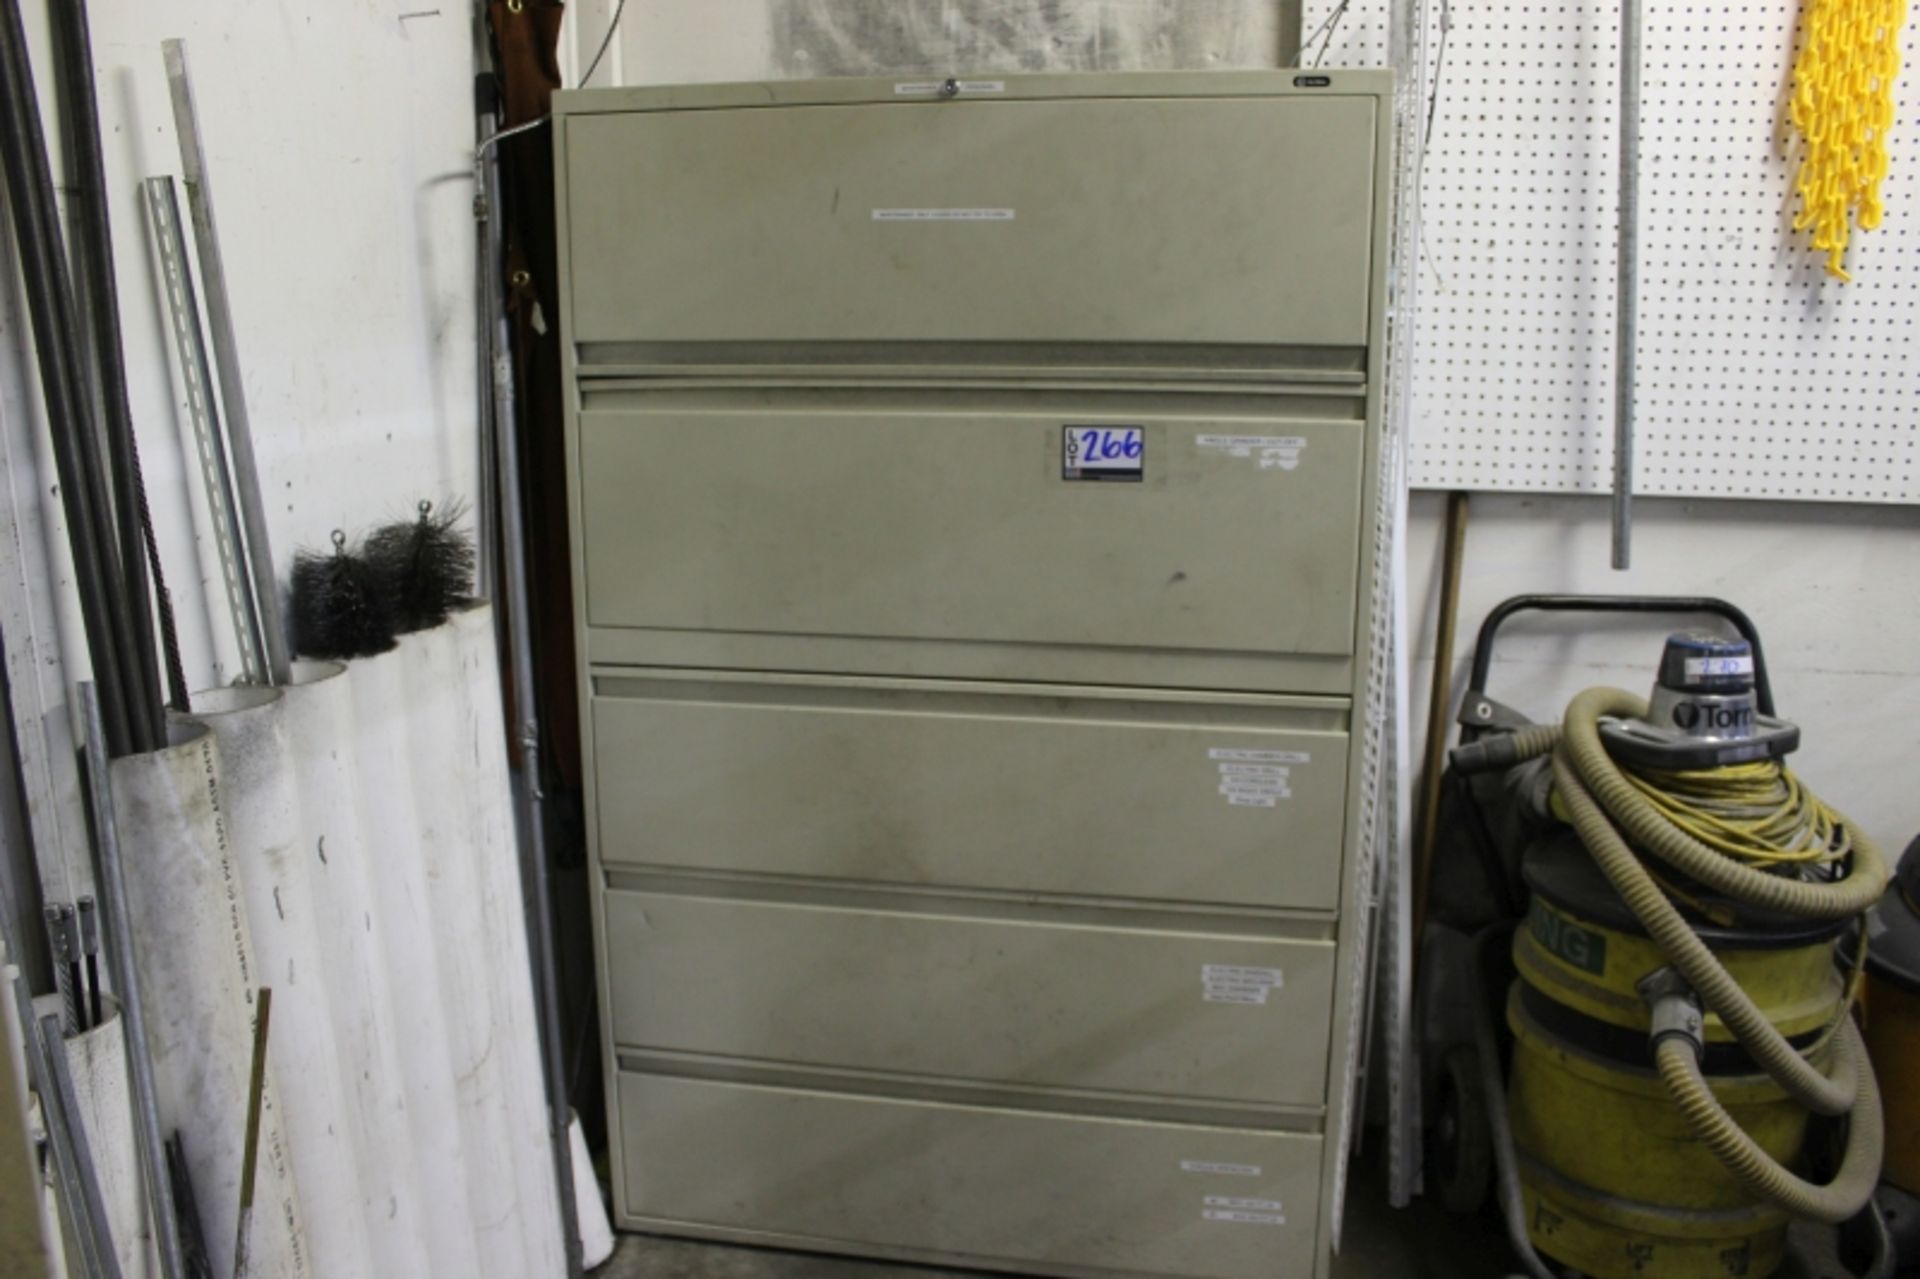 5 Drawer Cabinet with Content, Assorted Hoses, Wire, & Tools